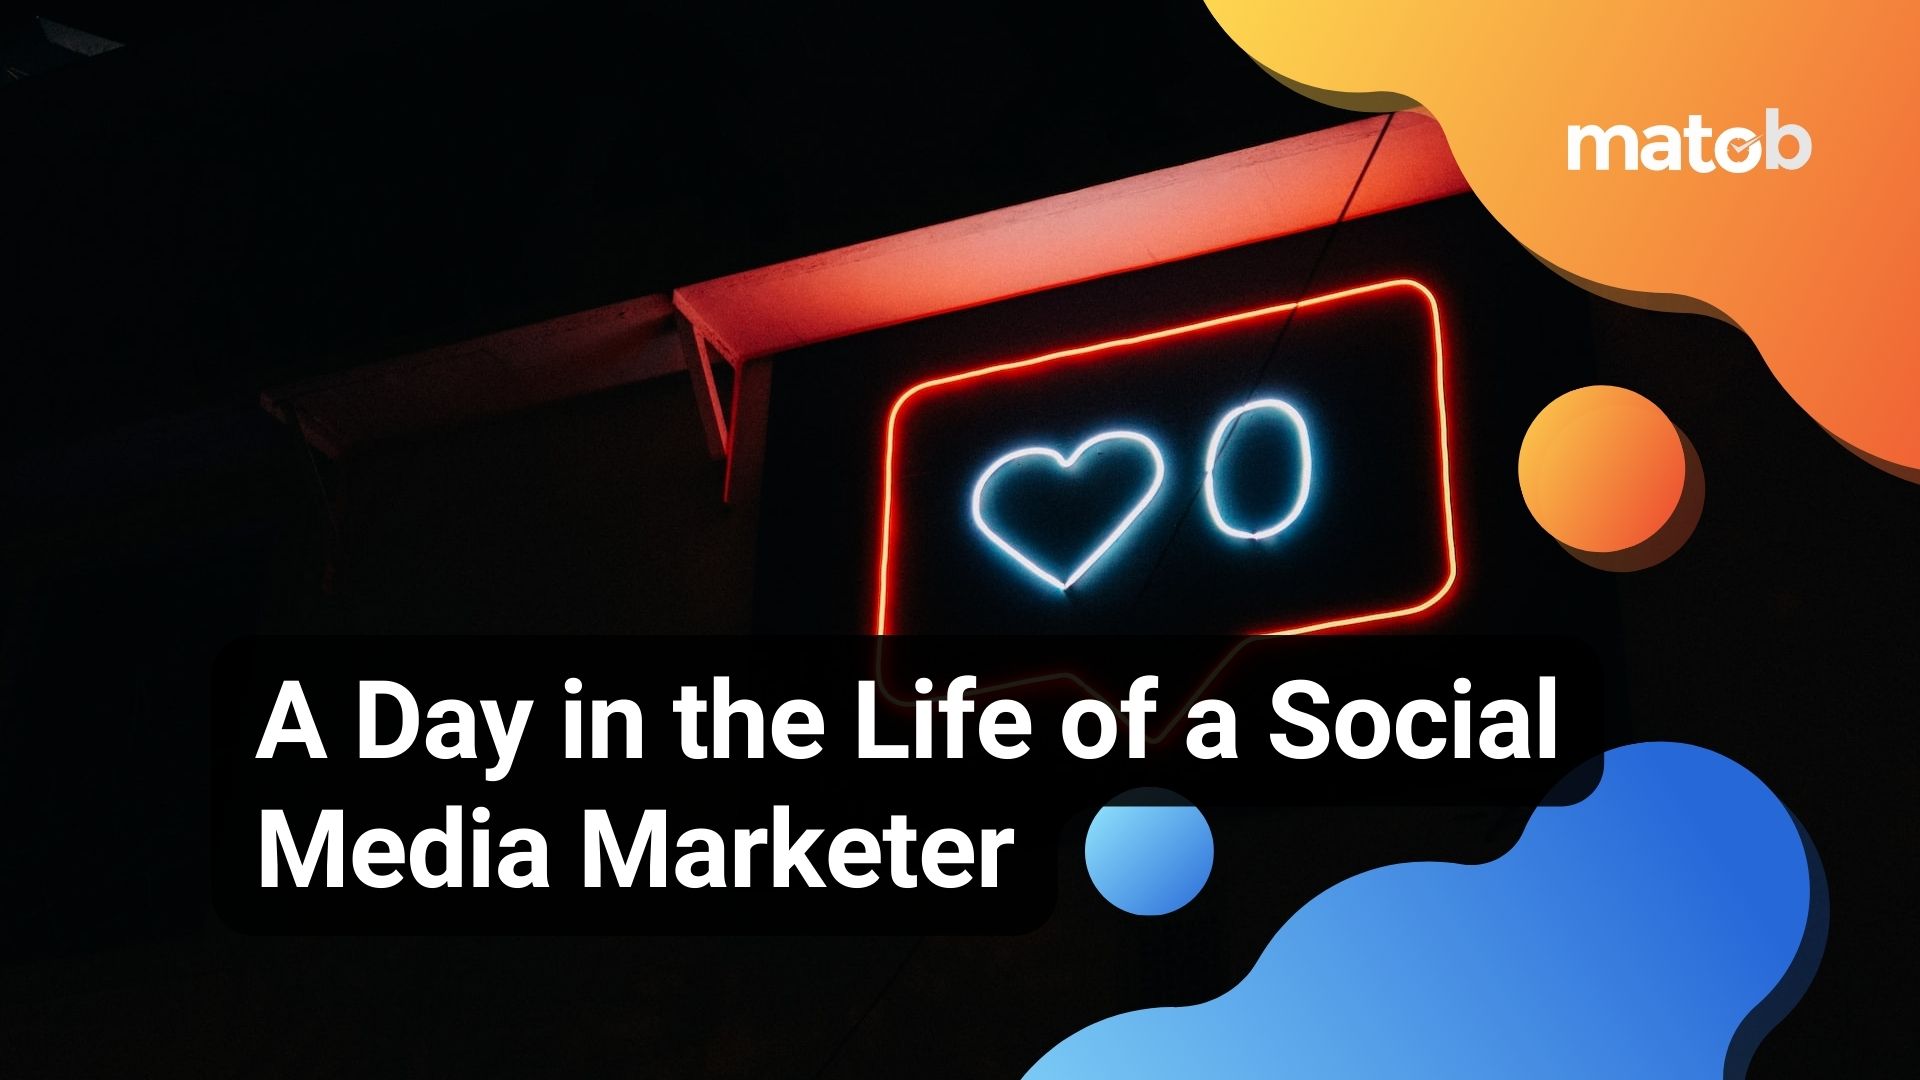 A Day in the Life of a Social Media Marketer